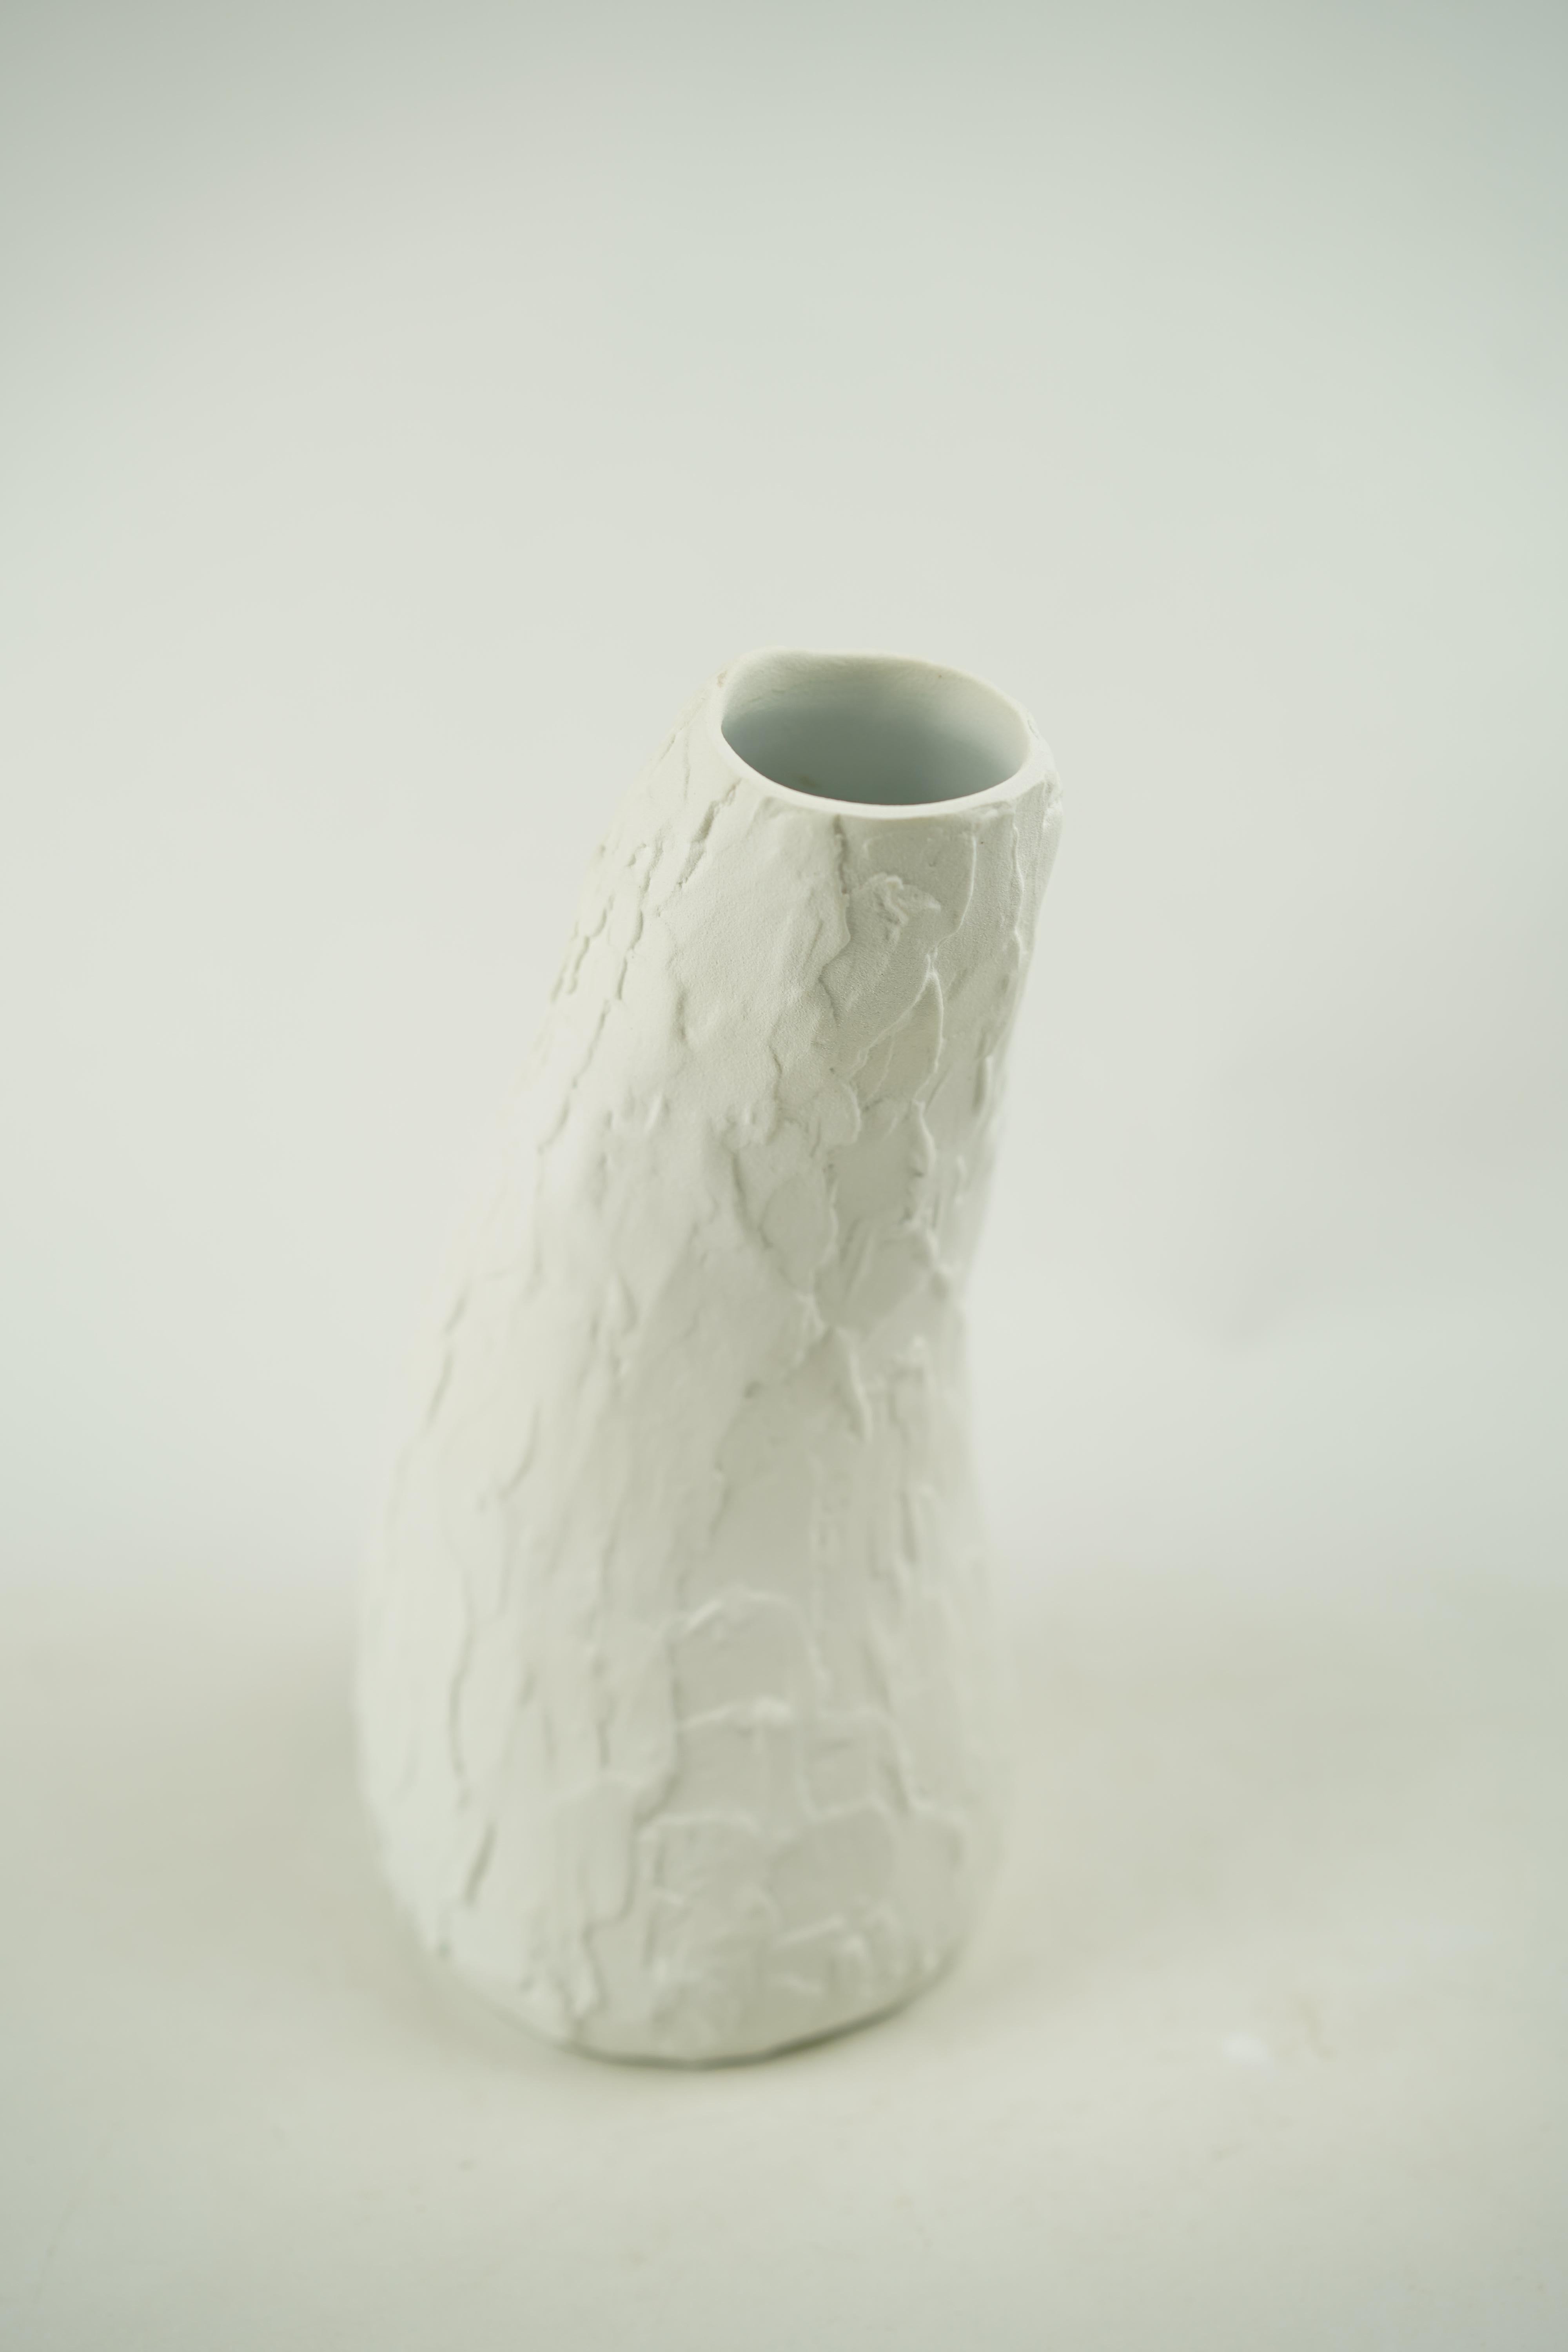 Like a curved tree trunk seeking the touch of light, the Bow Vase series resembles that gentle lean into the sun. With a minimal body, on closer inspection, this vase features detailed veins and impressions across its facade, adding a soft and